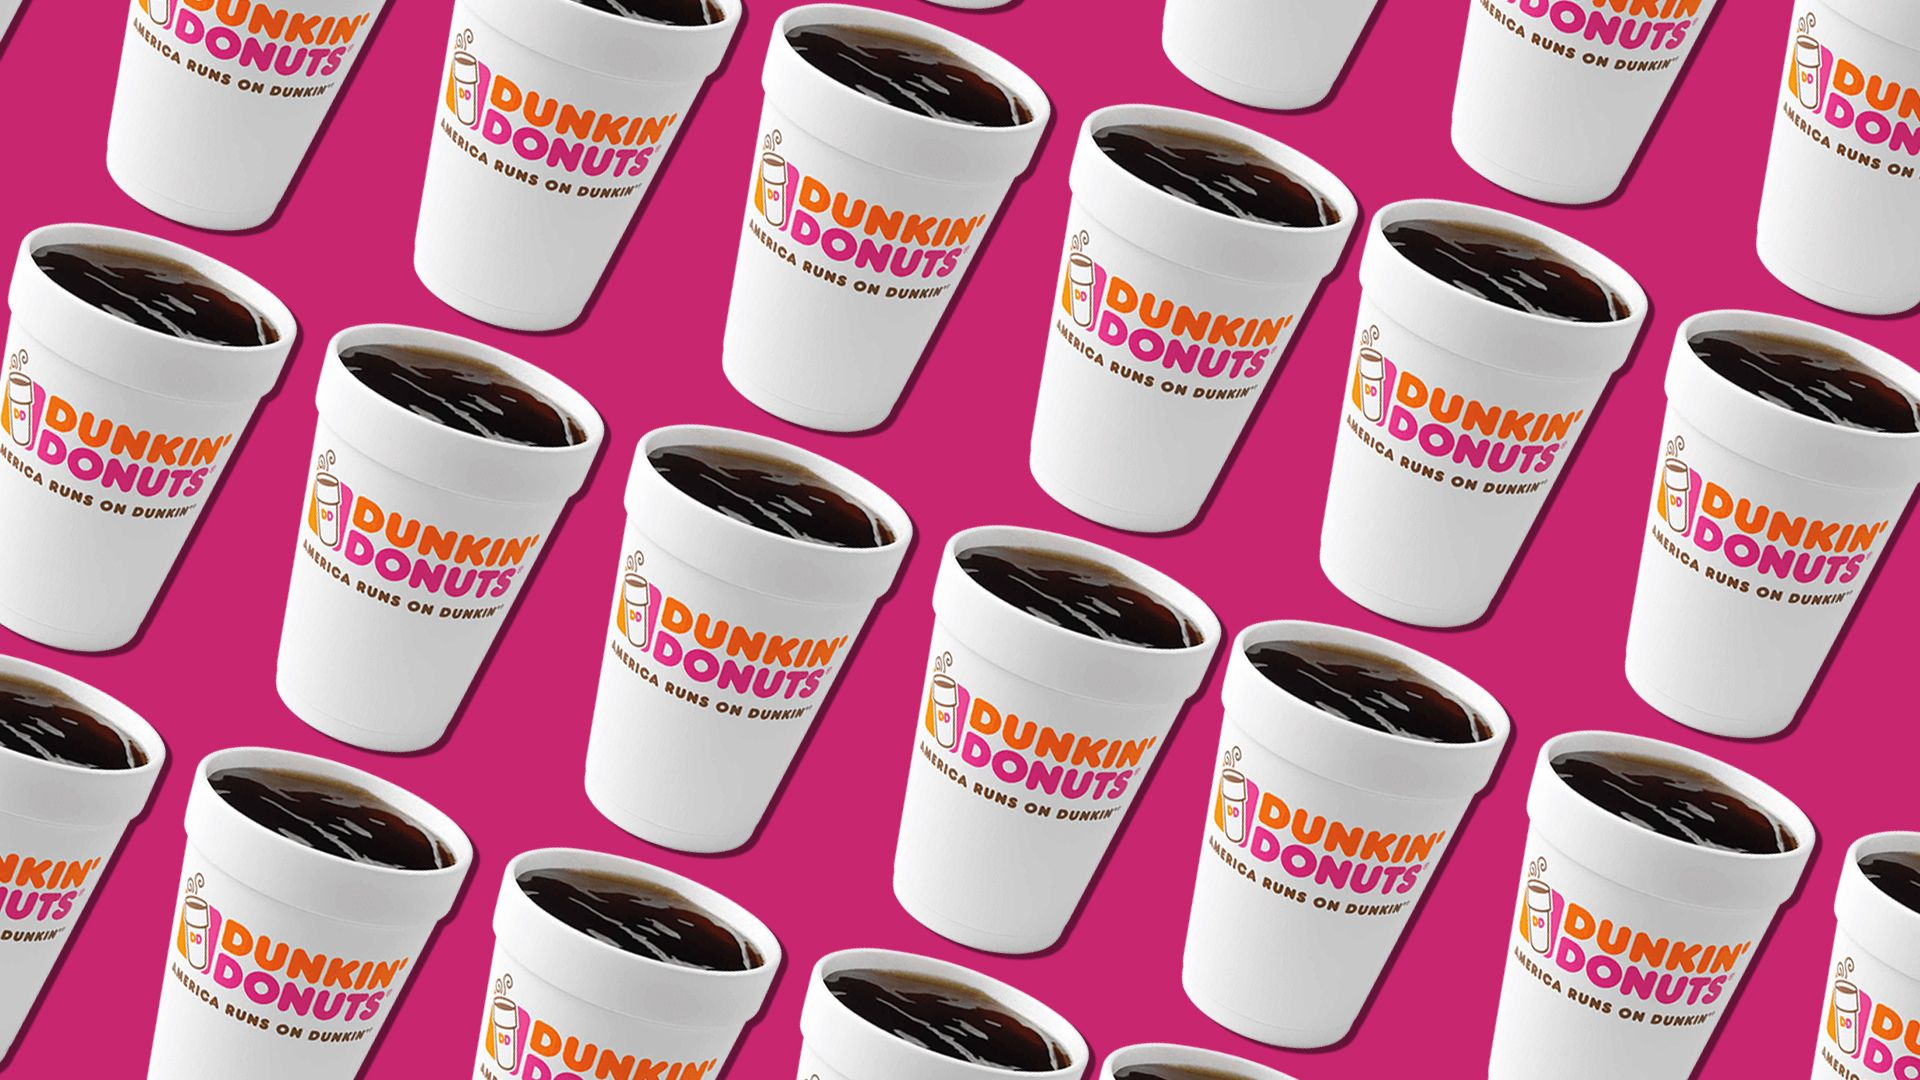 Dunkin' Donuts has a new name drops Donuts officially